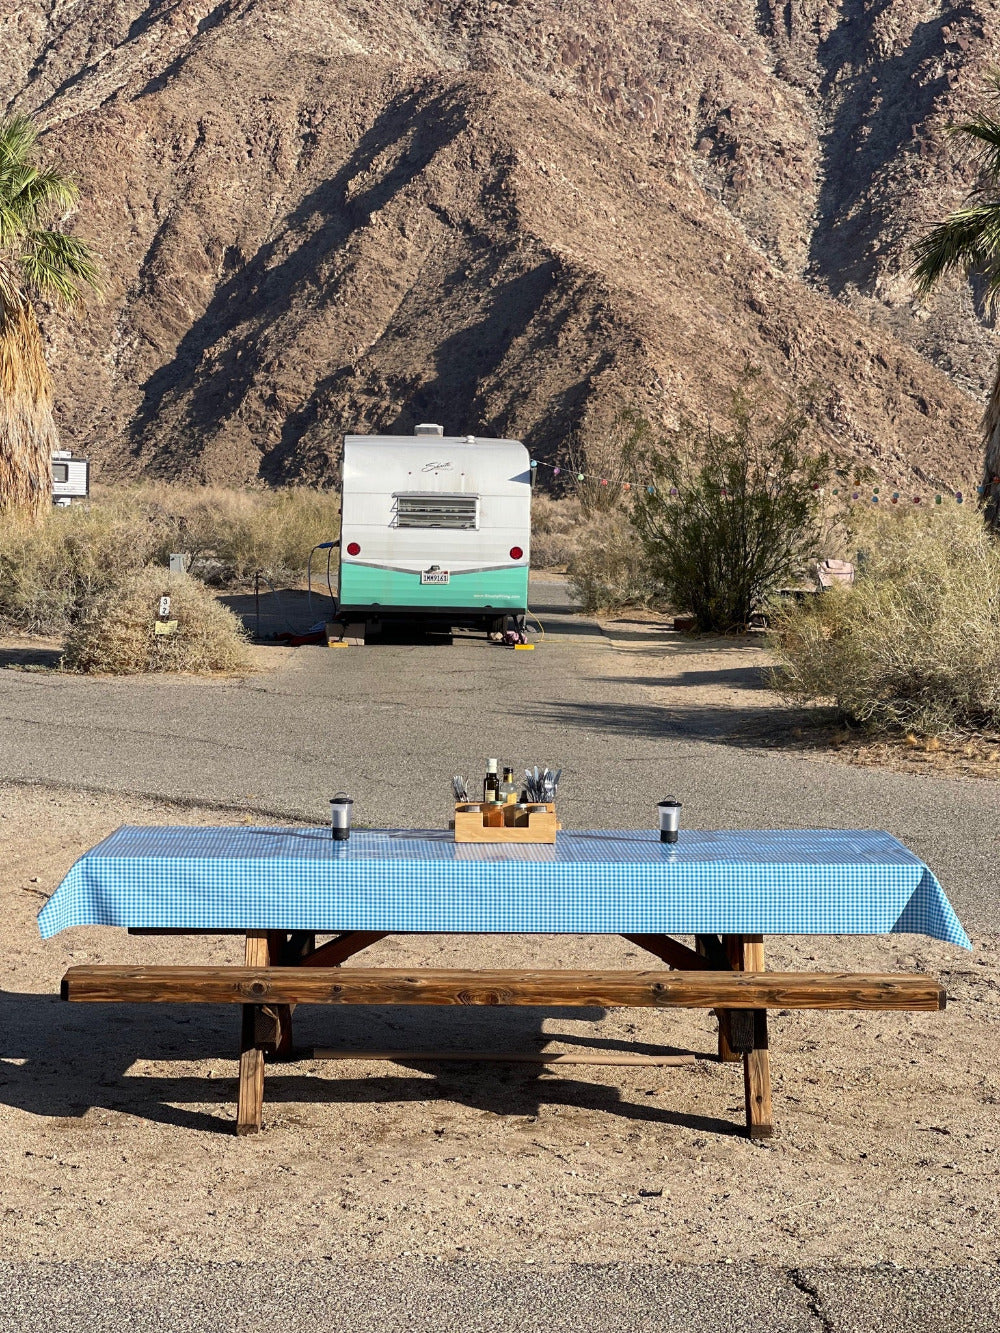 Blue and white outdoor tablecloth on a picnic camp site table at a desert campsite